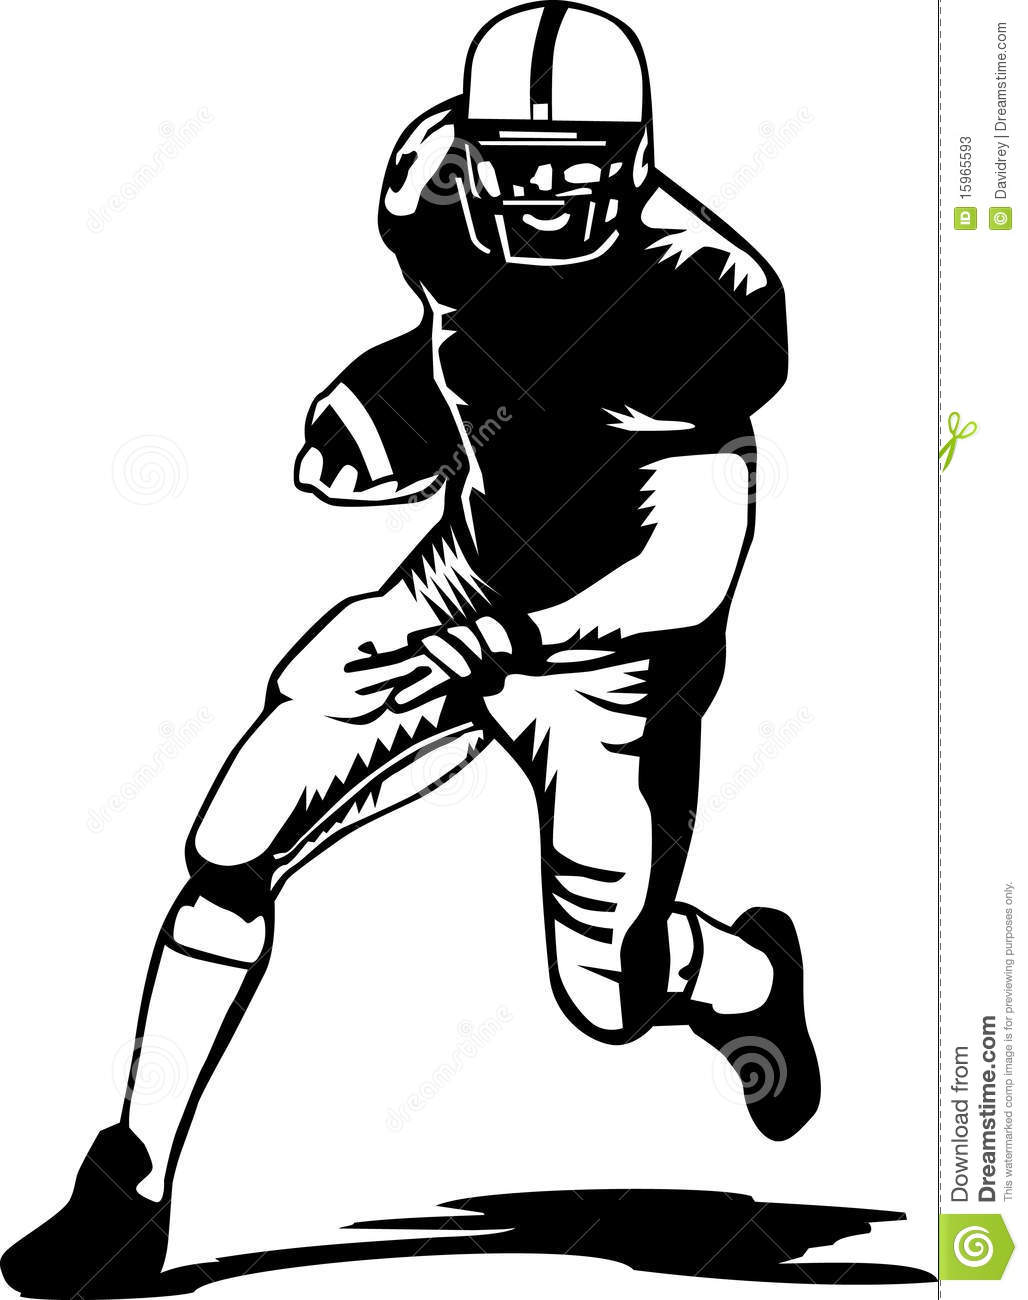 More Similar Stock Images Of   Football Player Black And White